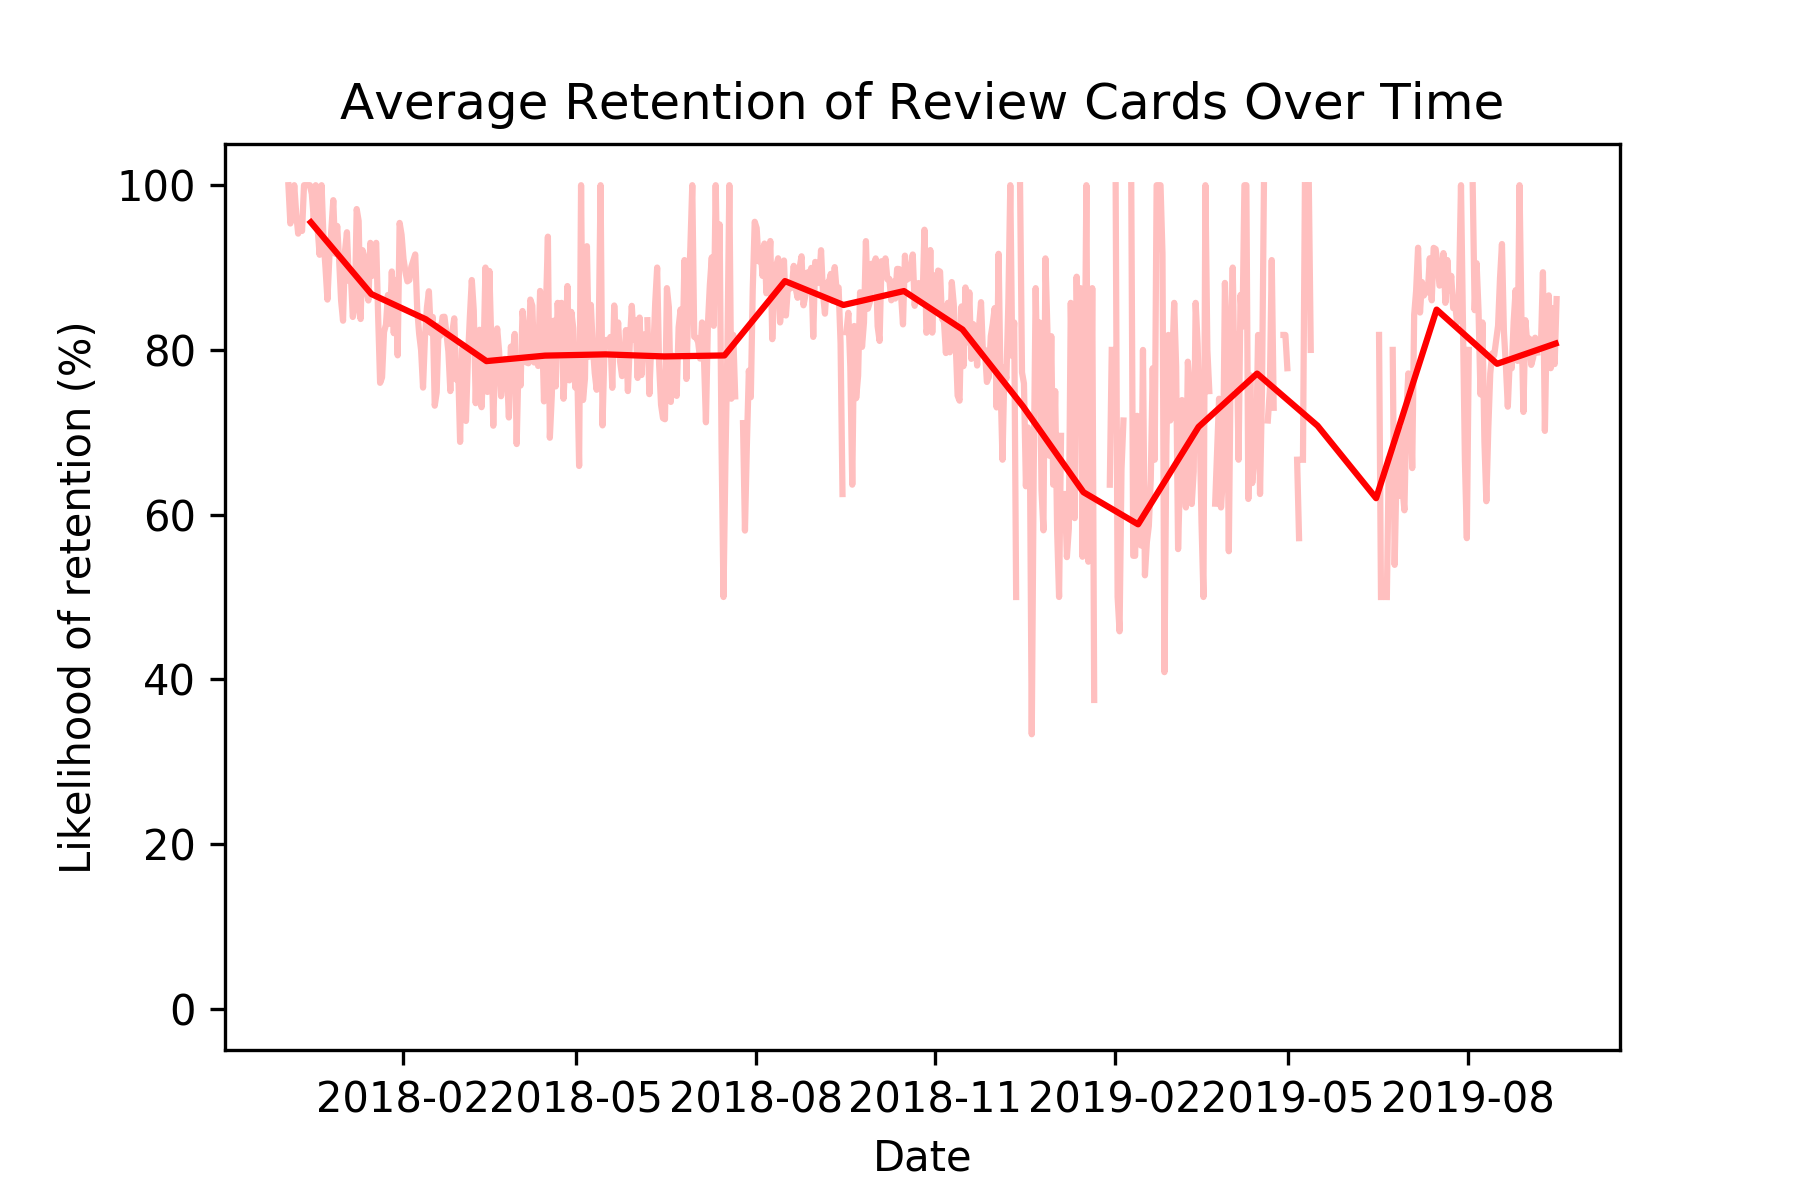 Retention over time